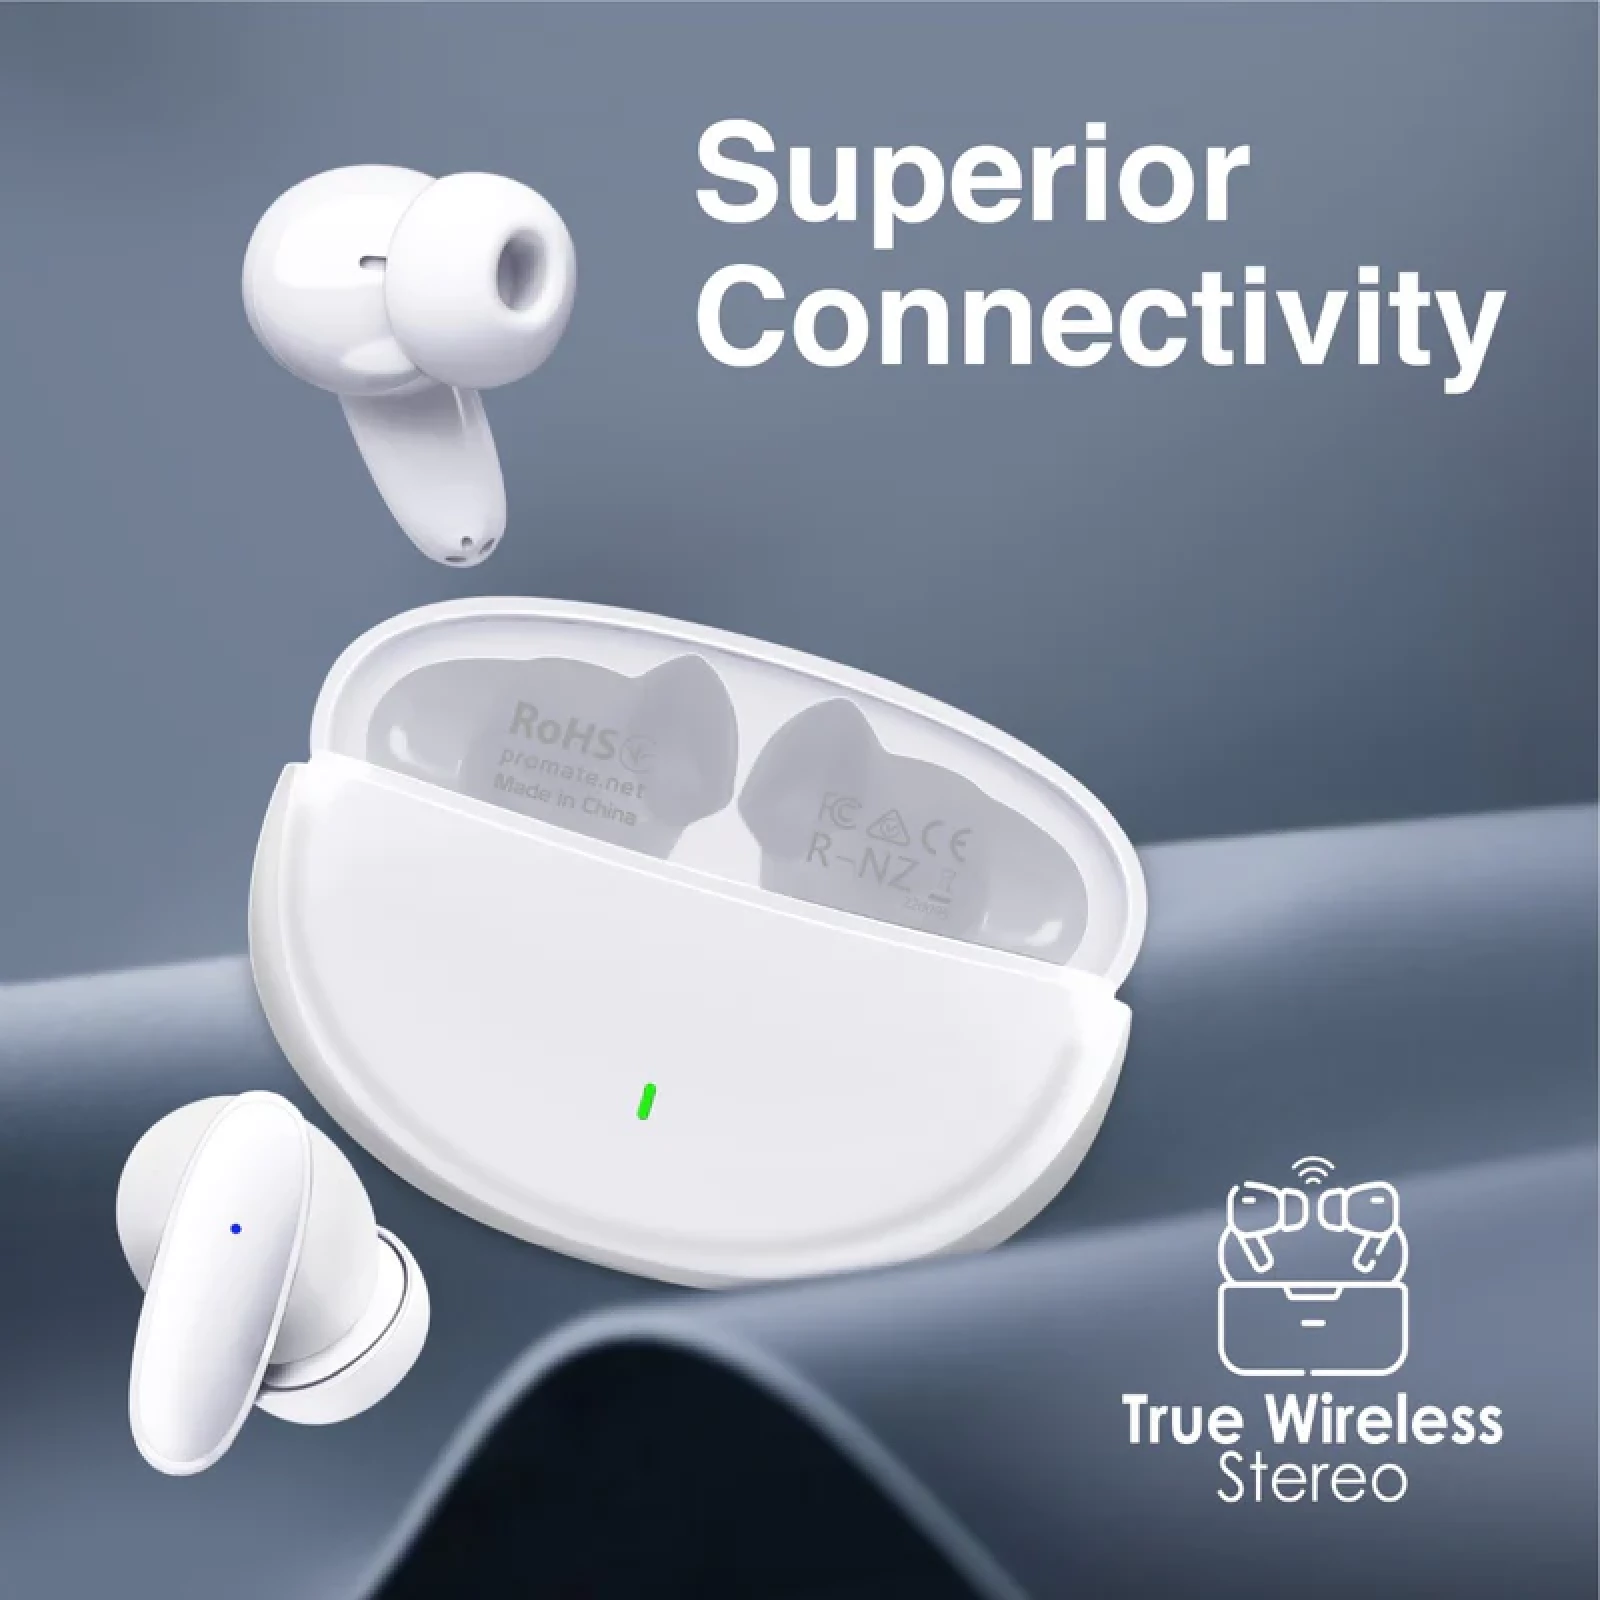 Безжични слушалки ProMate LUSH, Acoustic In-Ear TWS Bluetooth v5.1 Earphone • 19-Hour Playback • Ergonomic Fit Earbuds • Stable Connectivity, Бял